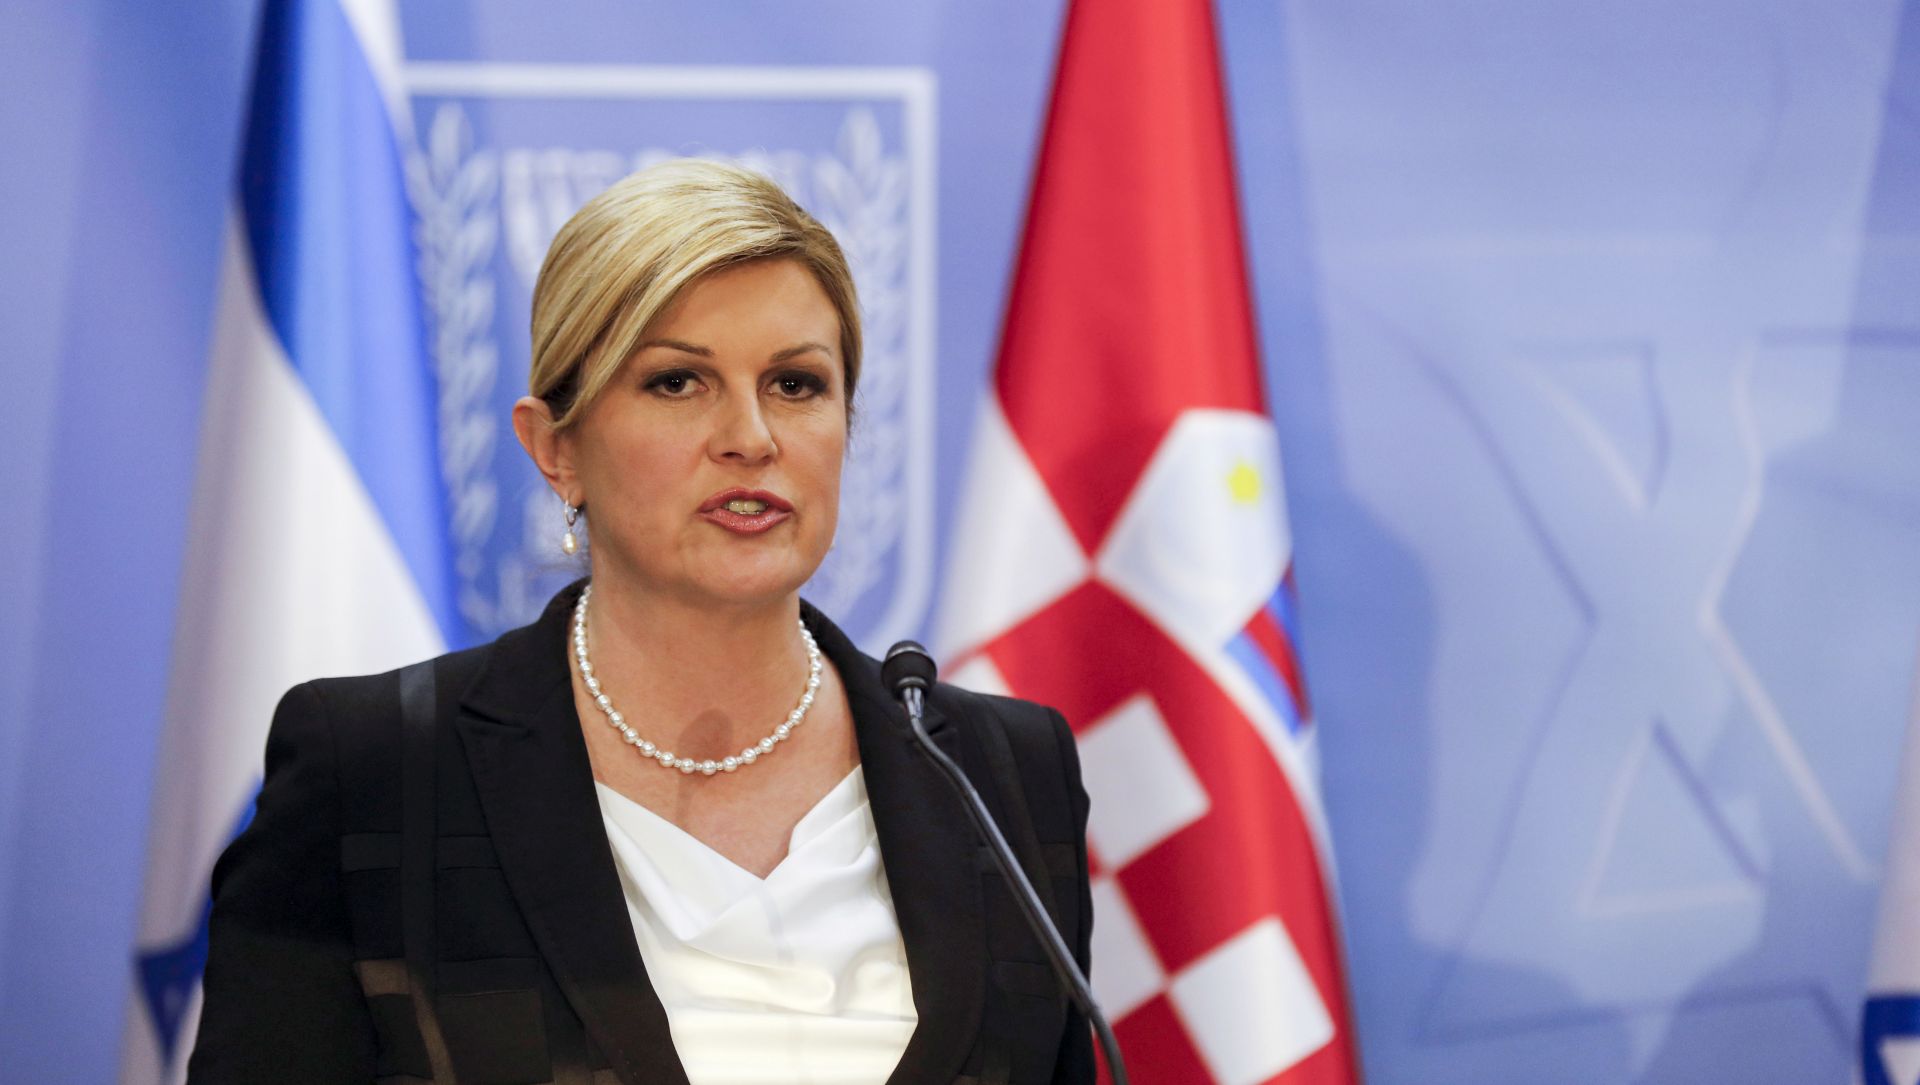 epa07747457 Croatian President Kolinda Grabar-Kitarovic gives a joint press conference with the Israeli Prime Minister at the Prime Minister's office in Jerusalem, 29 July 2019. Grabar-Kitarovic is on a two-day state visit to Israel.  EPA/MENAHEM KAHANA / POOL